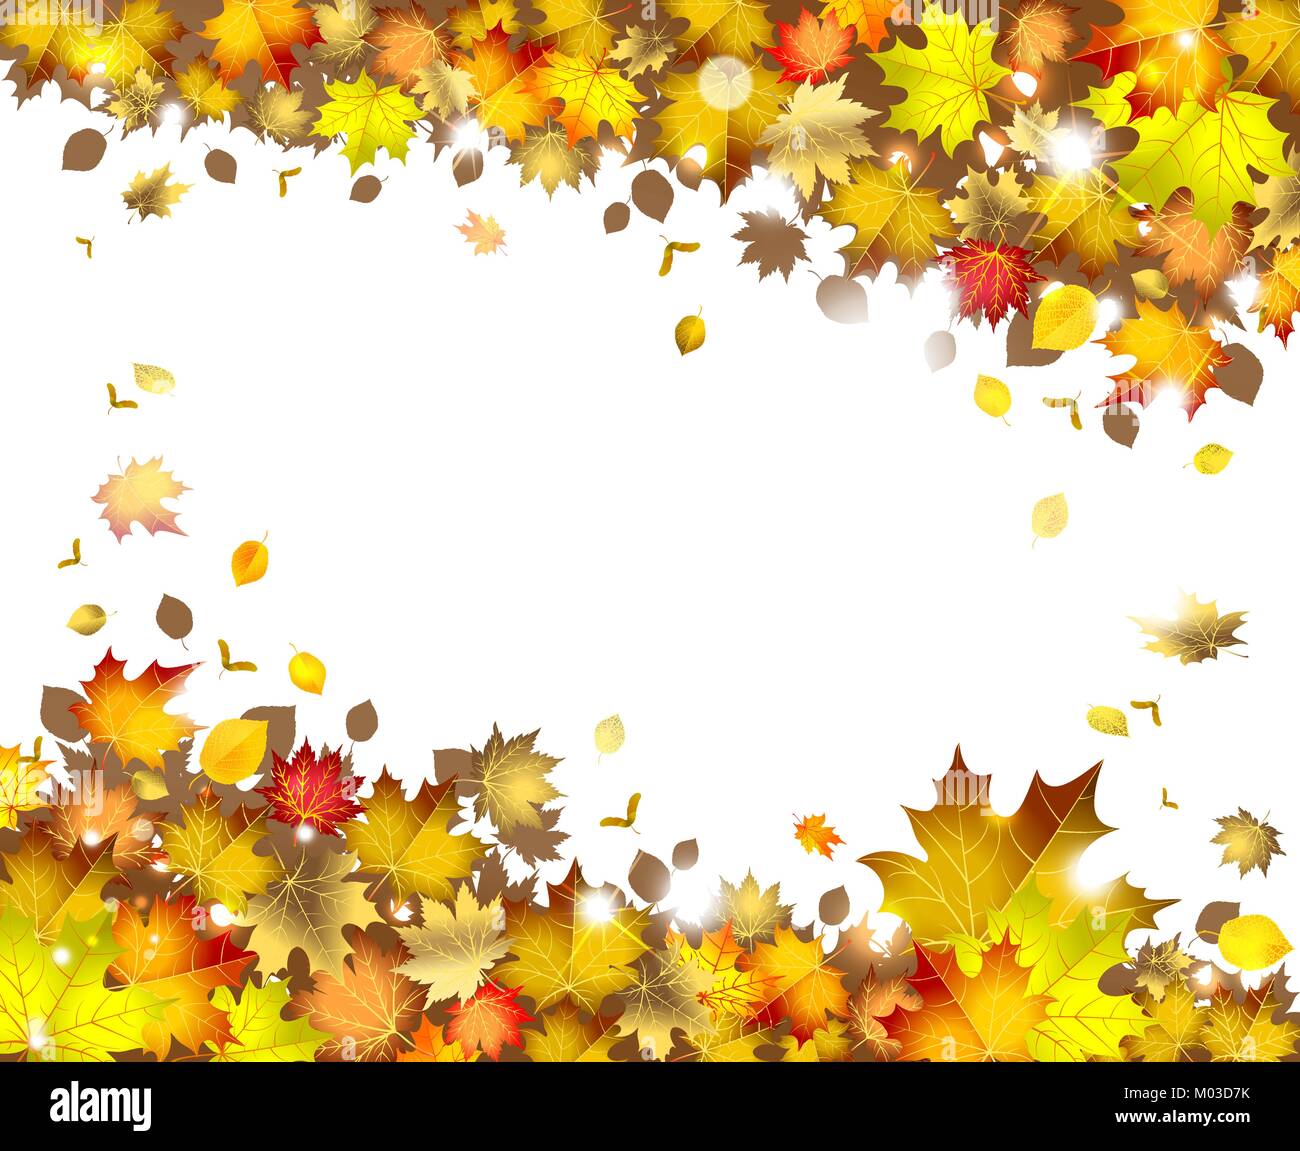 background of falling autumn leaves Stock Vector